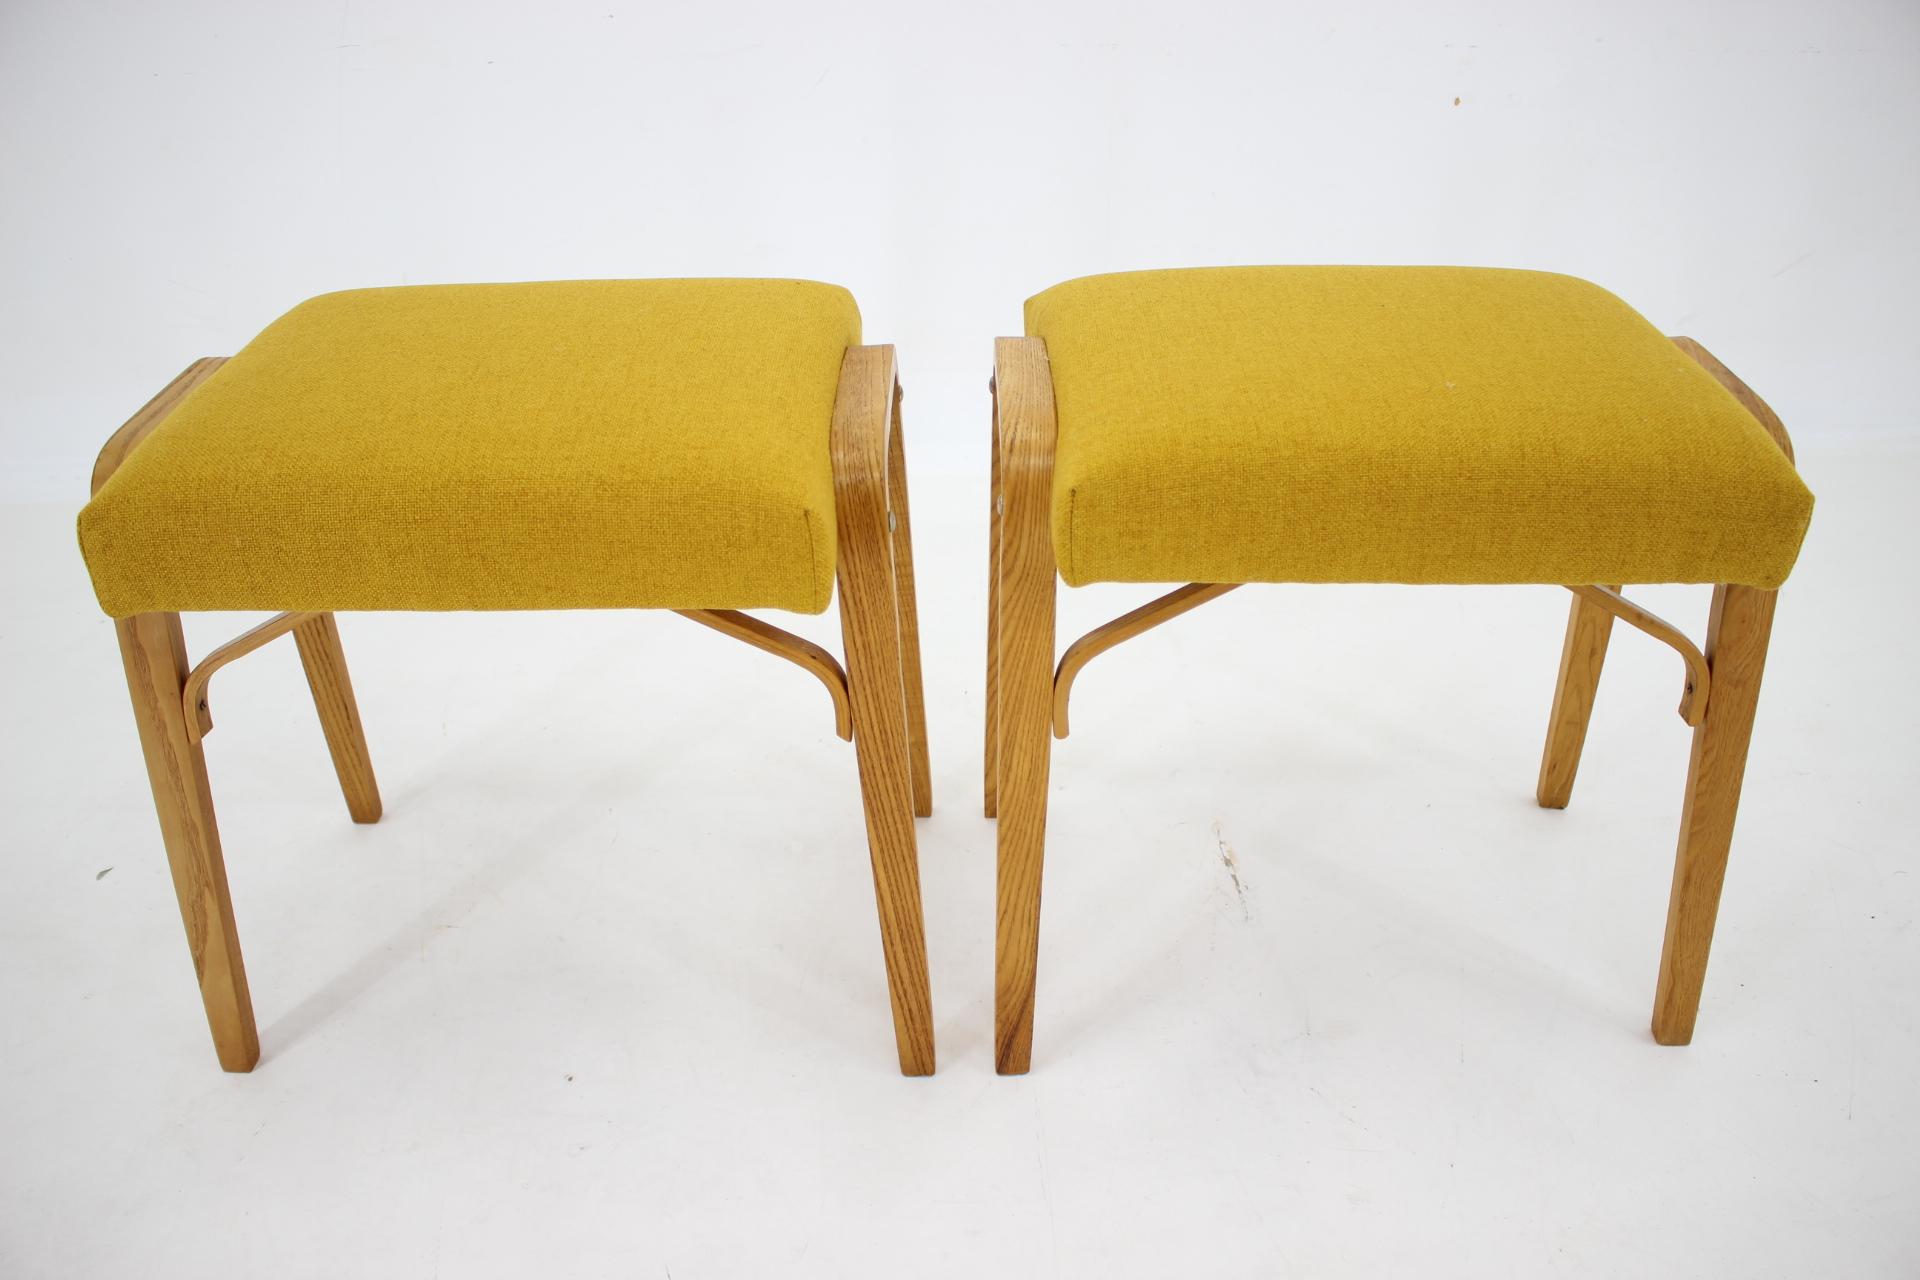 1960s Pair of Wooden Stools, Czechoslovakia For Sale 2